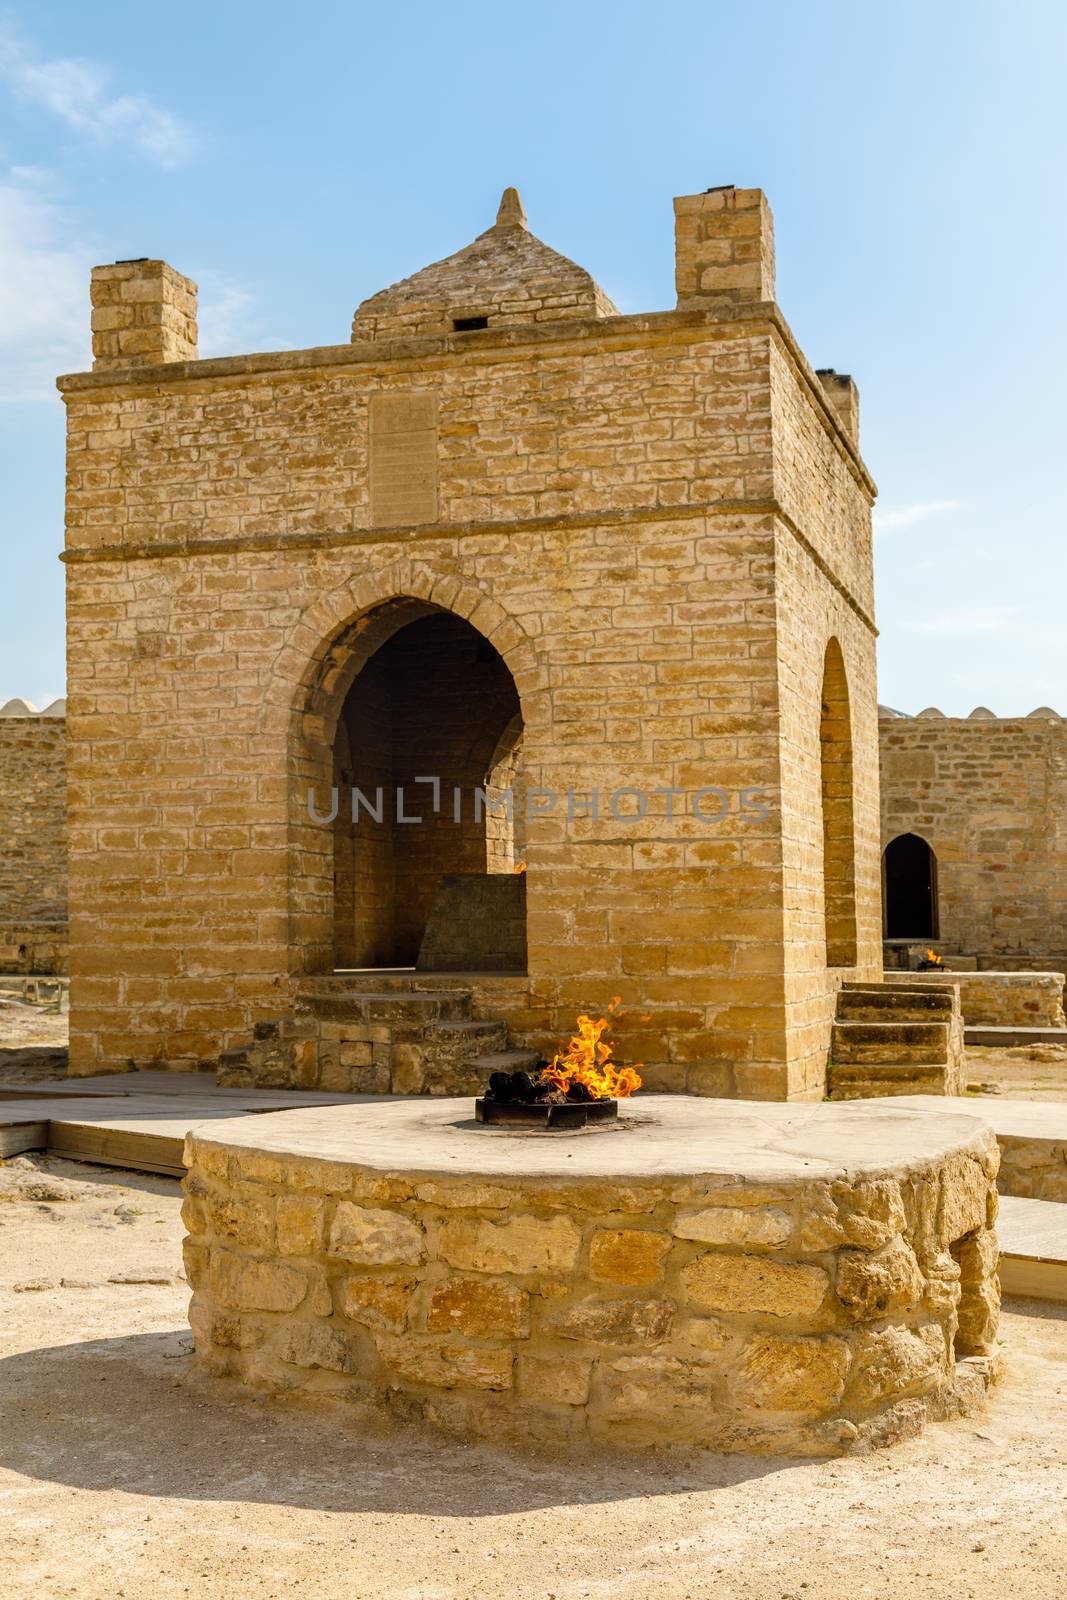 Ancient stone temple of Atashgah, Zoroastrian place of fire wors by ambeon